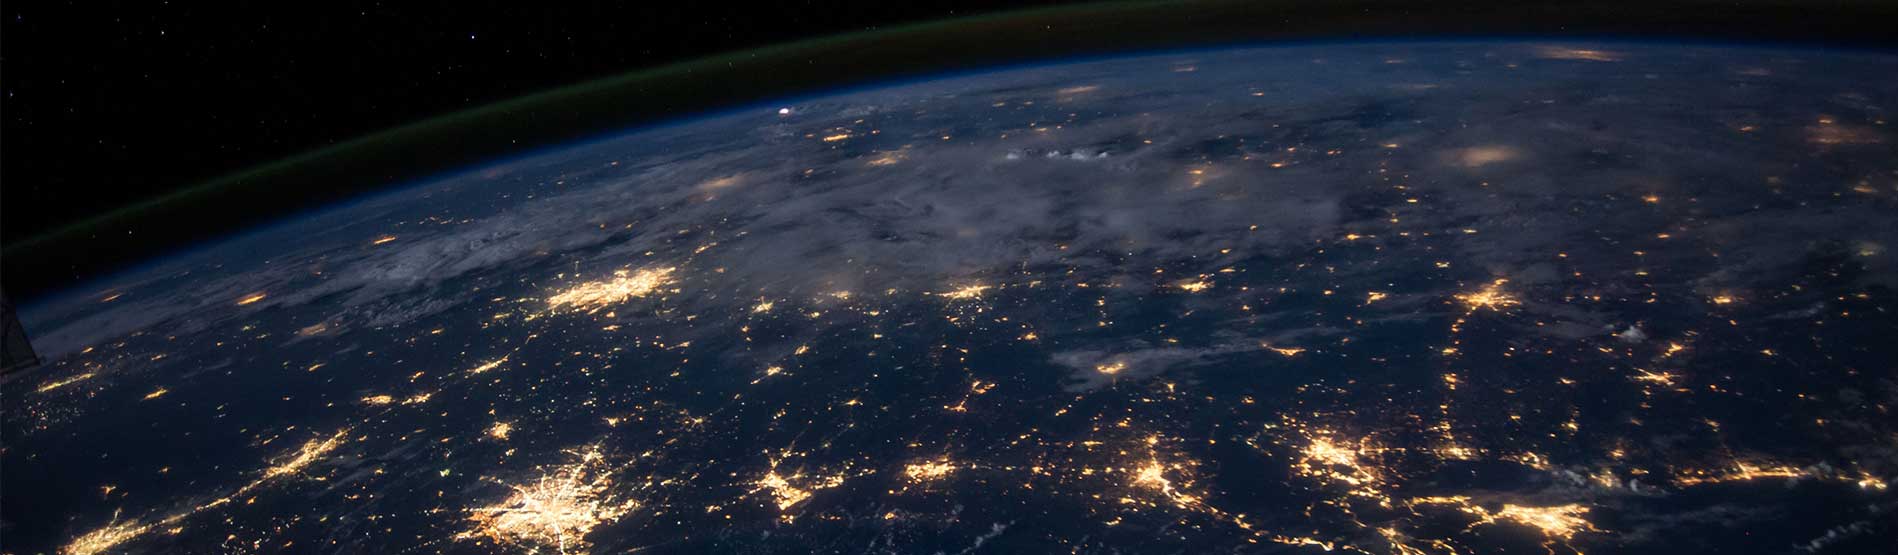 Image of earth at night with lights on